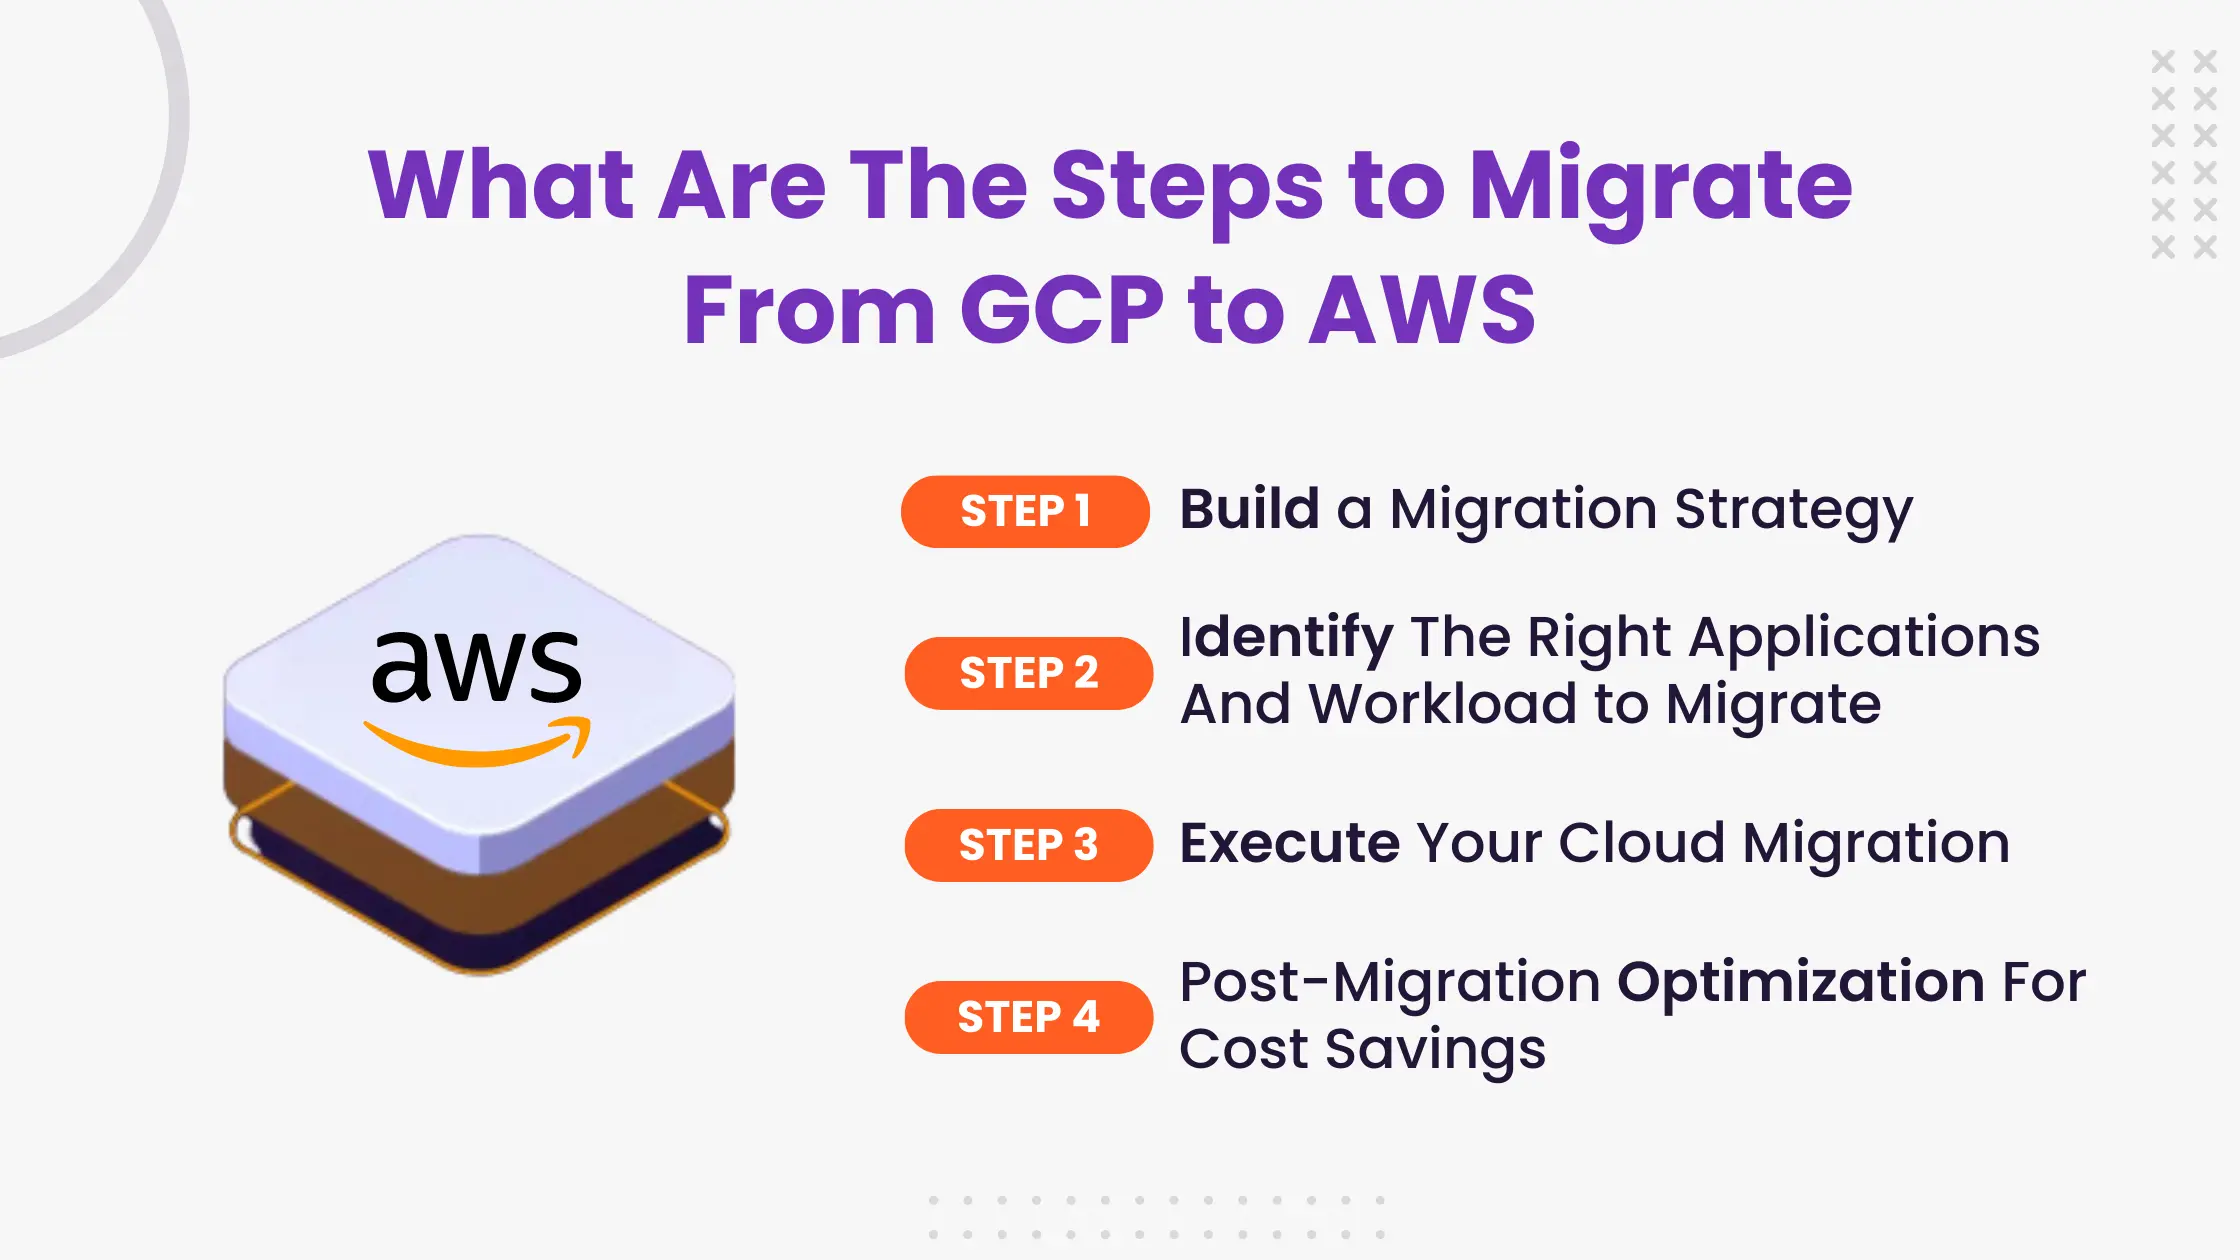 What Are The Steps to Migrate From GCP to AWS